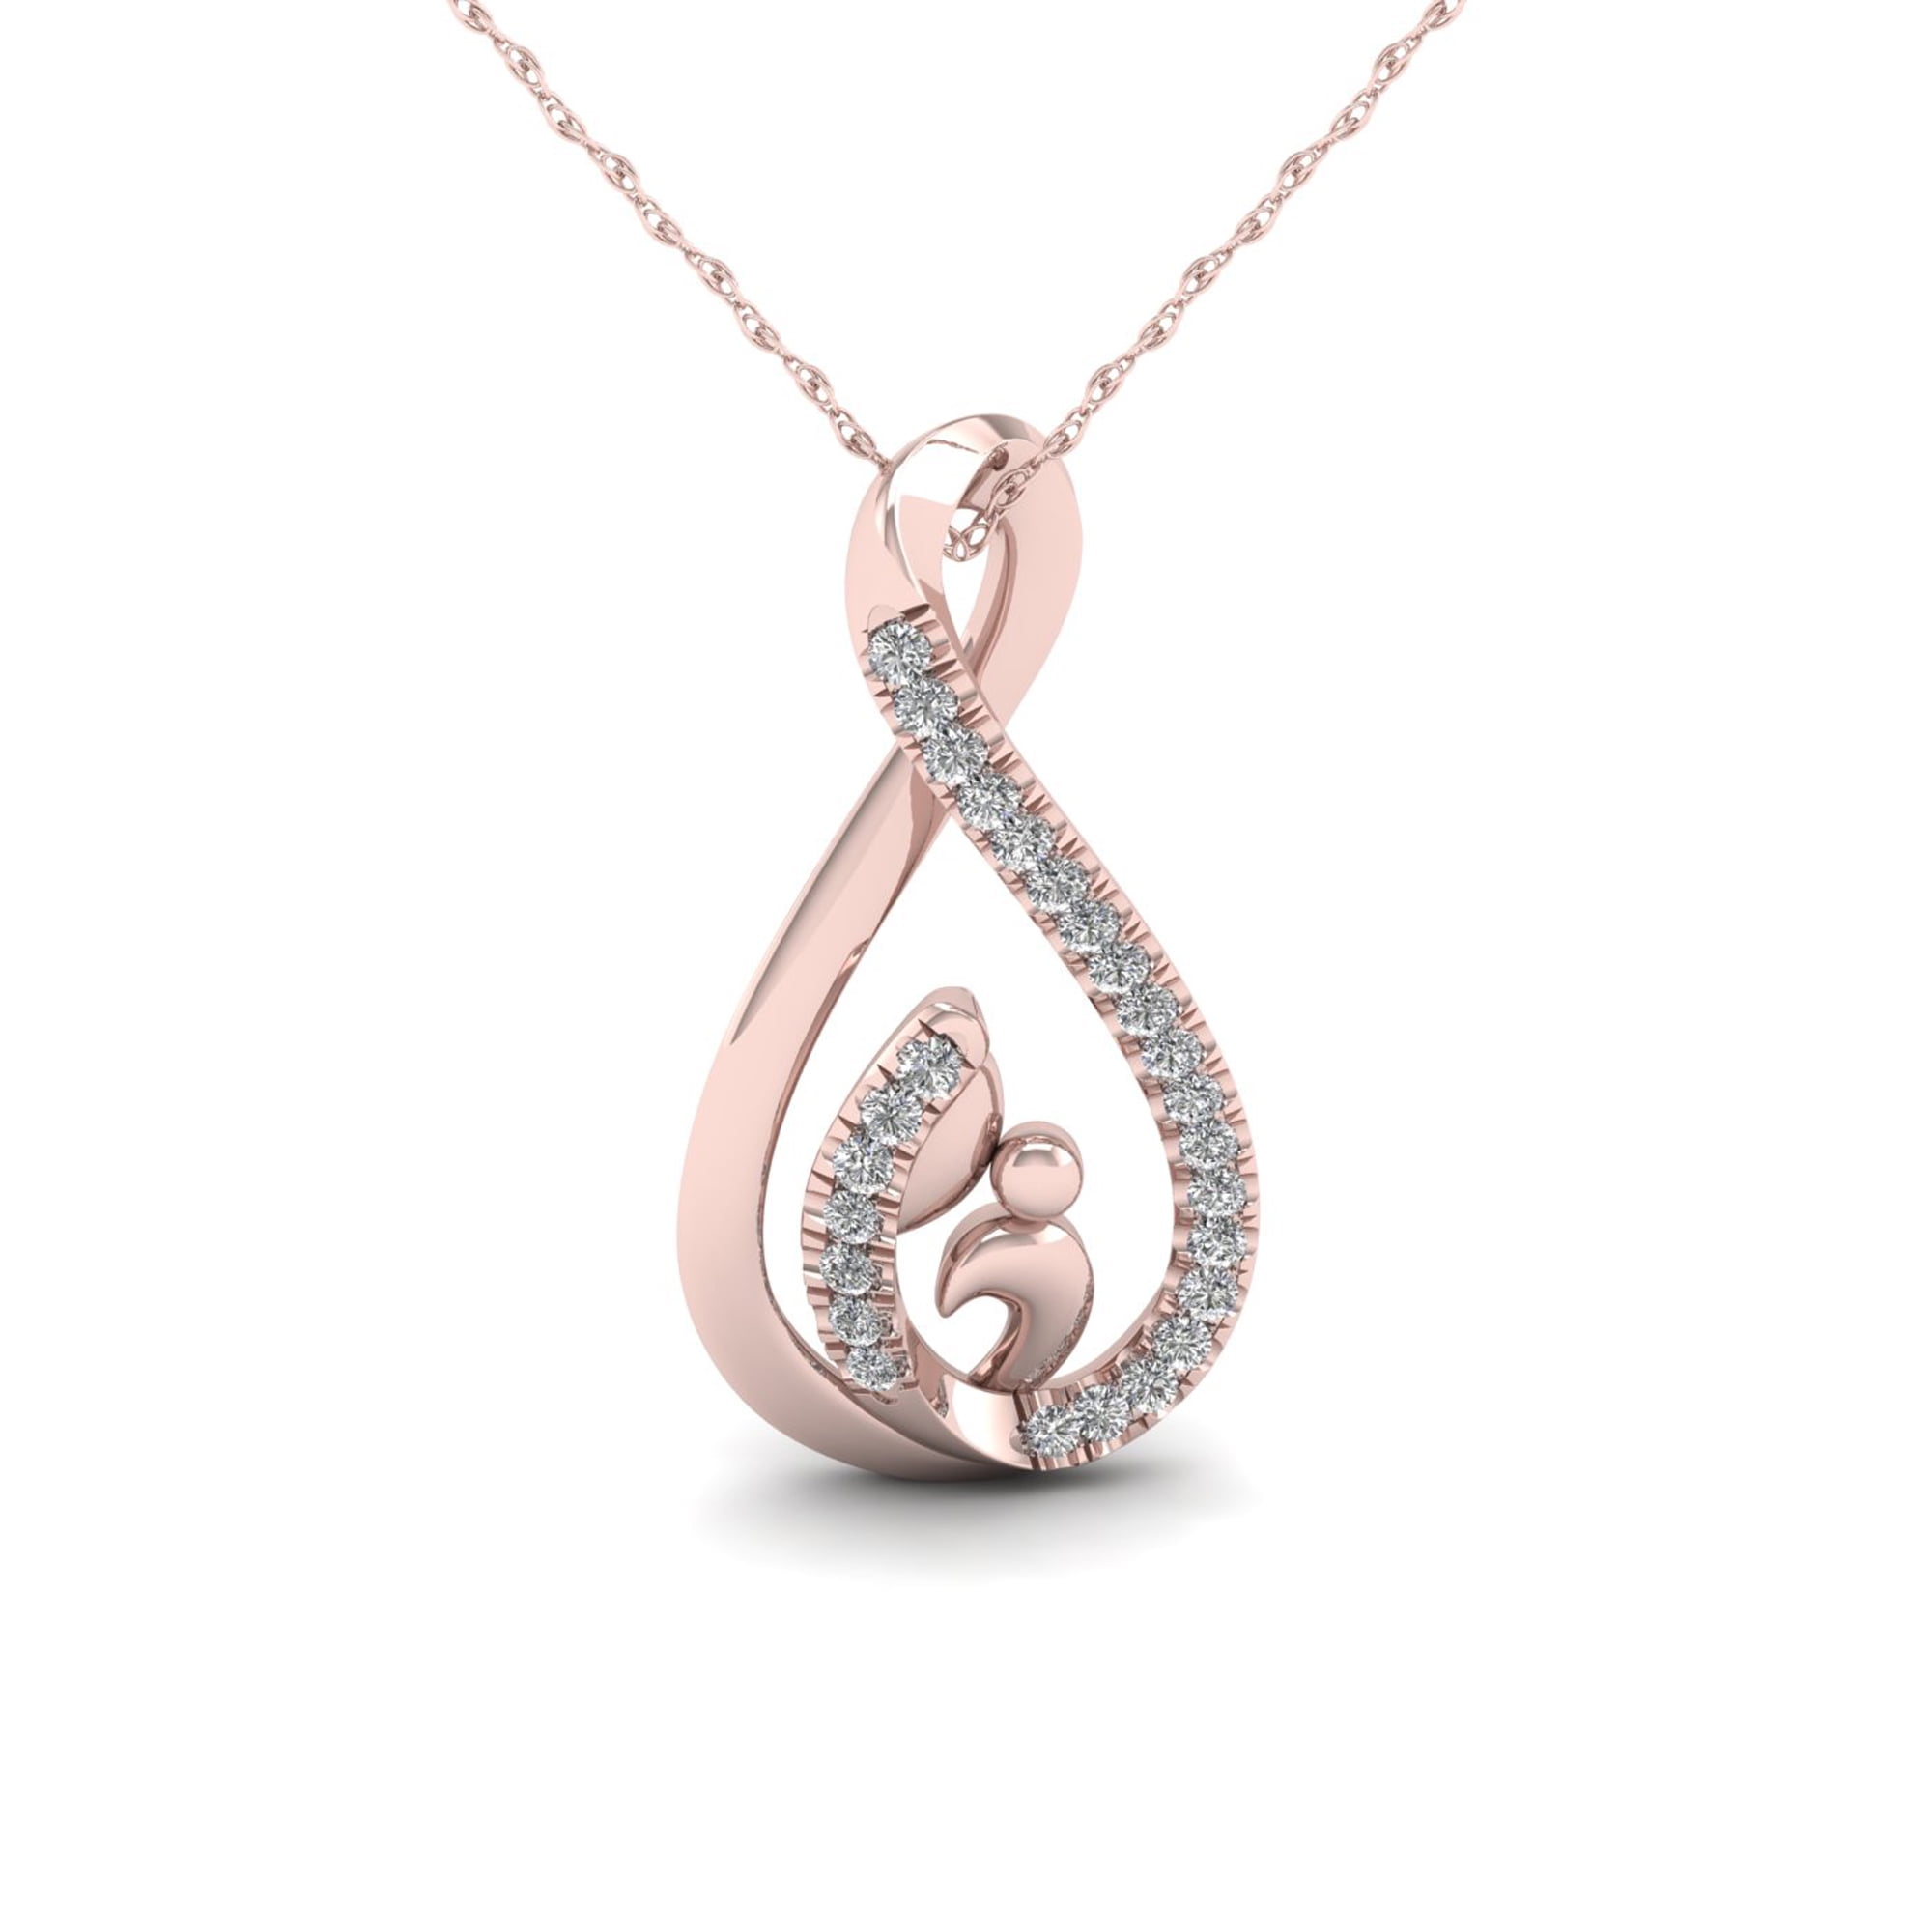 10k White Gold Infinity "MOM" Heart with Diamond Pendant Necklace